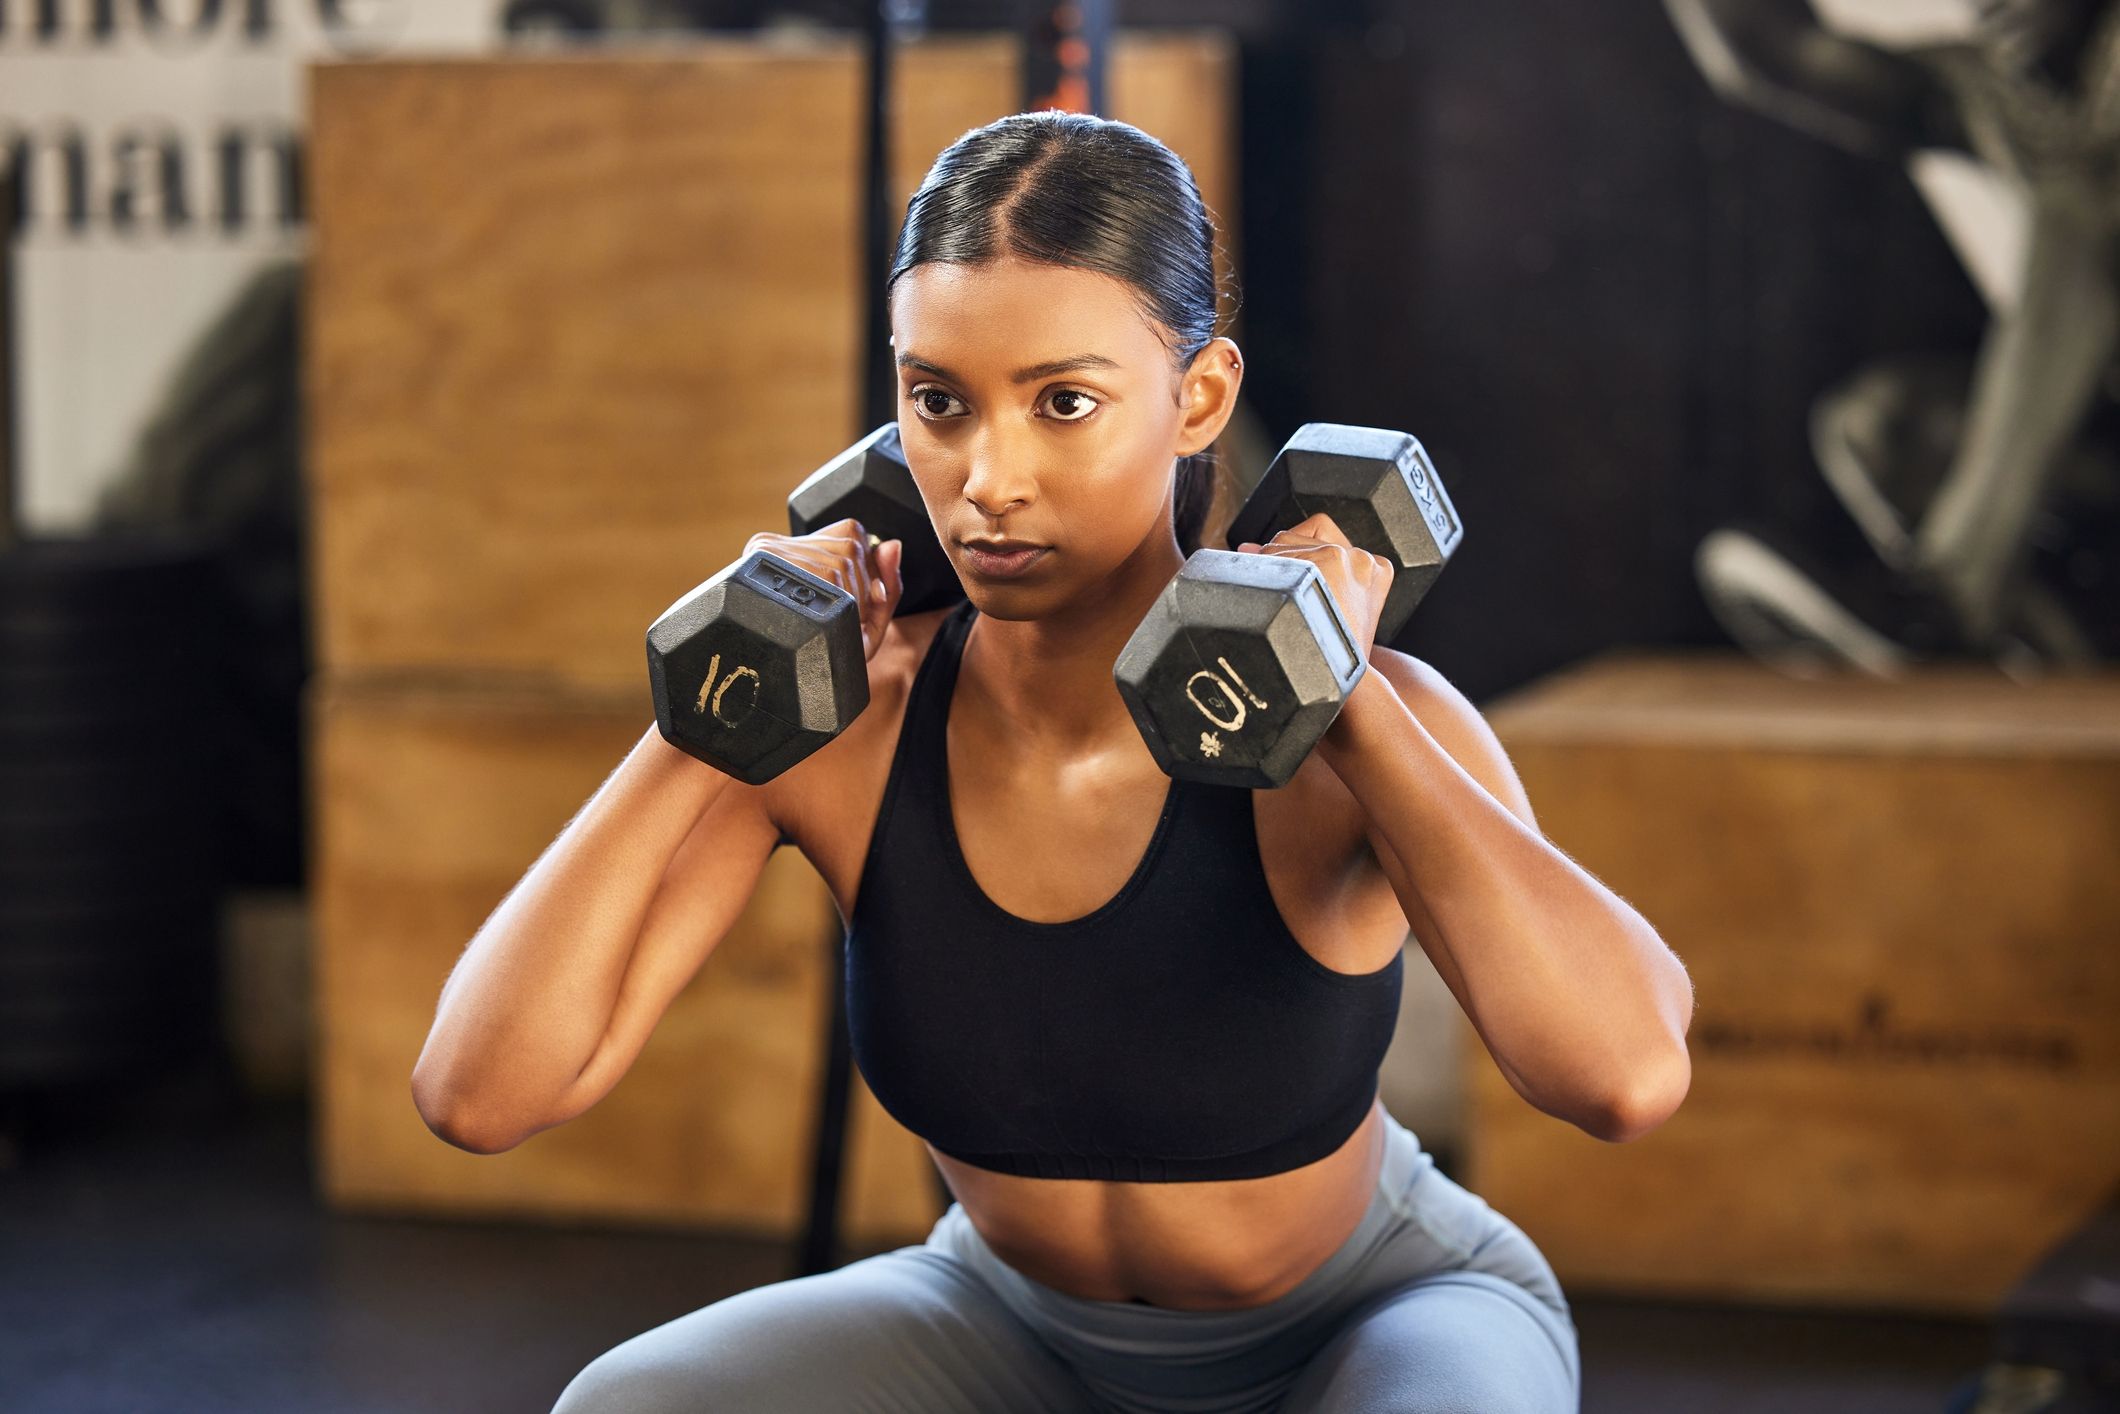 3 Ways To Boost Your Fitness Results Outside Of The Gym, According